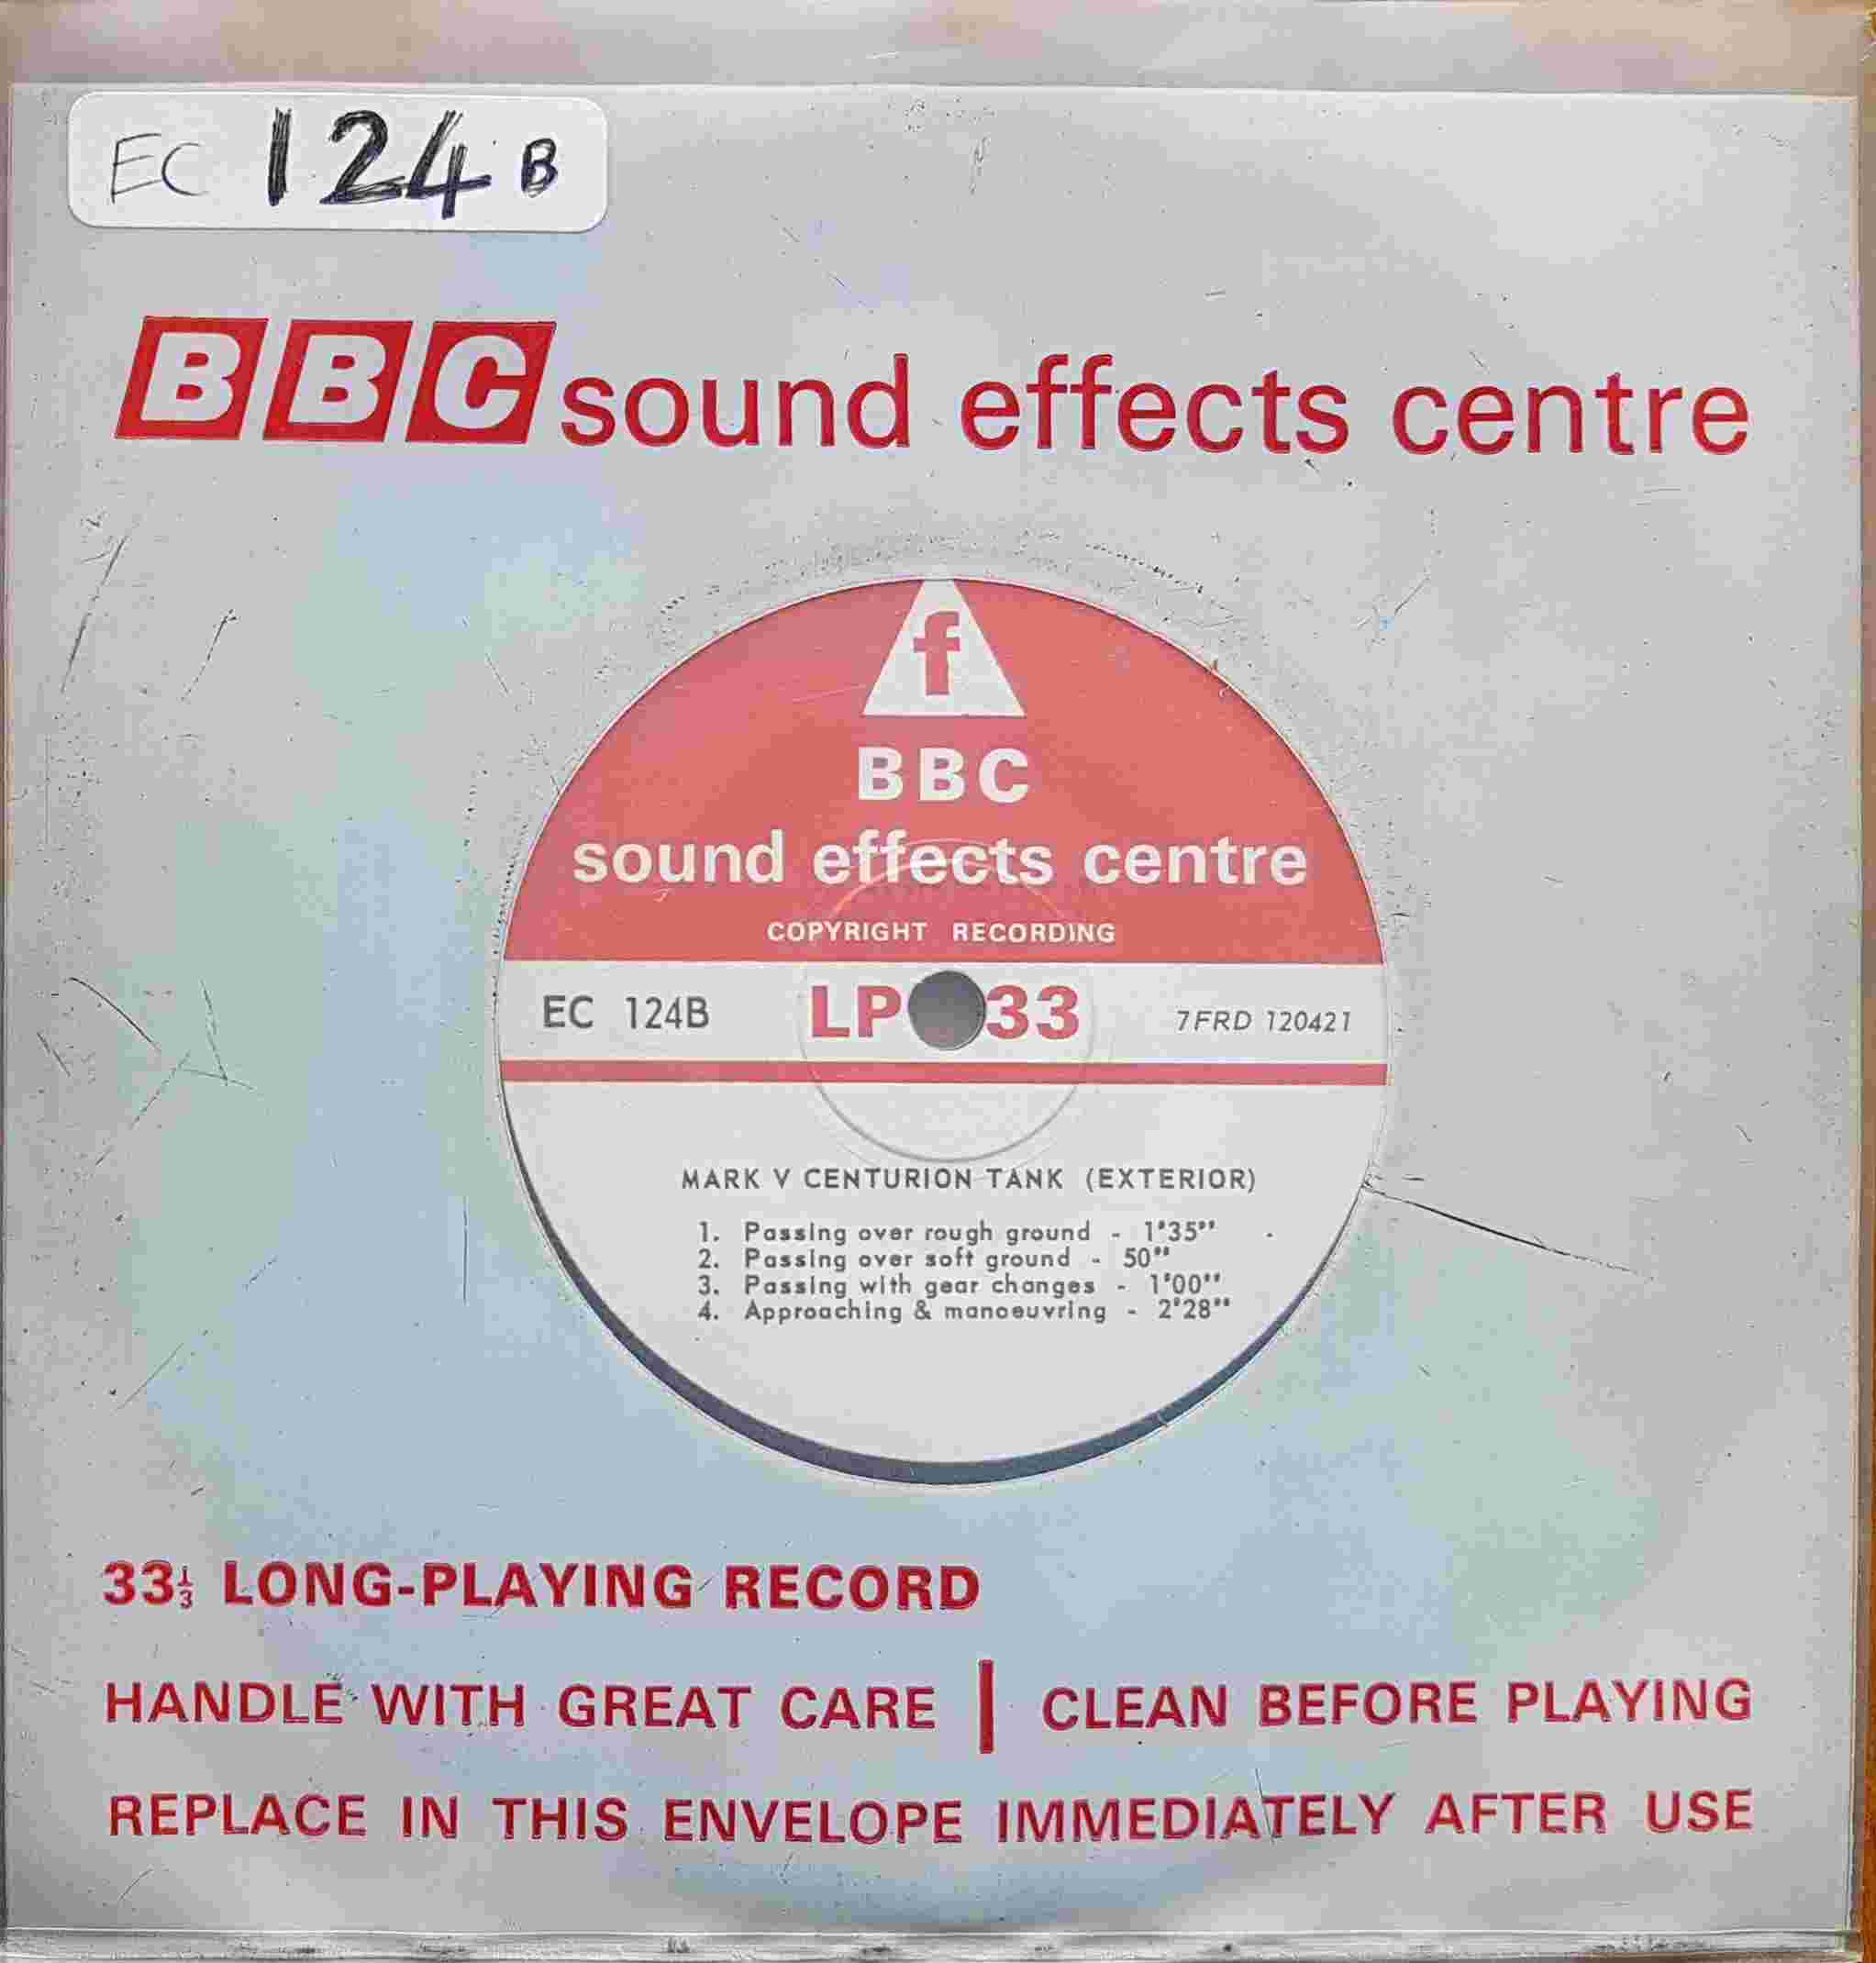 Picture of EC 124B Mark V Centurion tank (Exterior) by artist Not registered from the BBC singles - Records and Tapes library